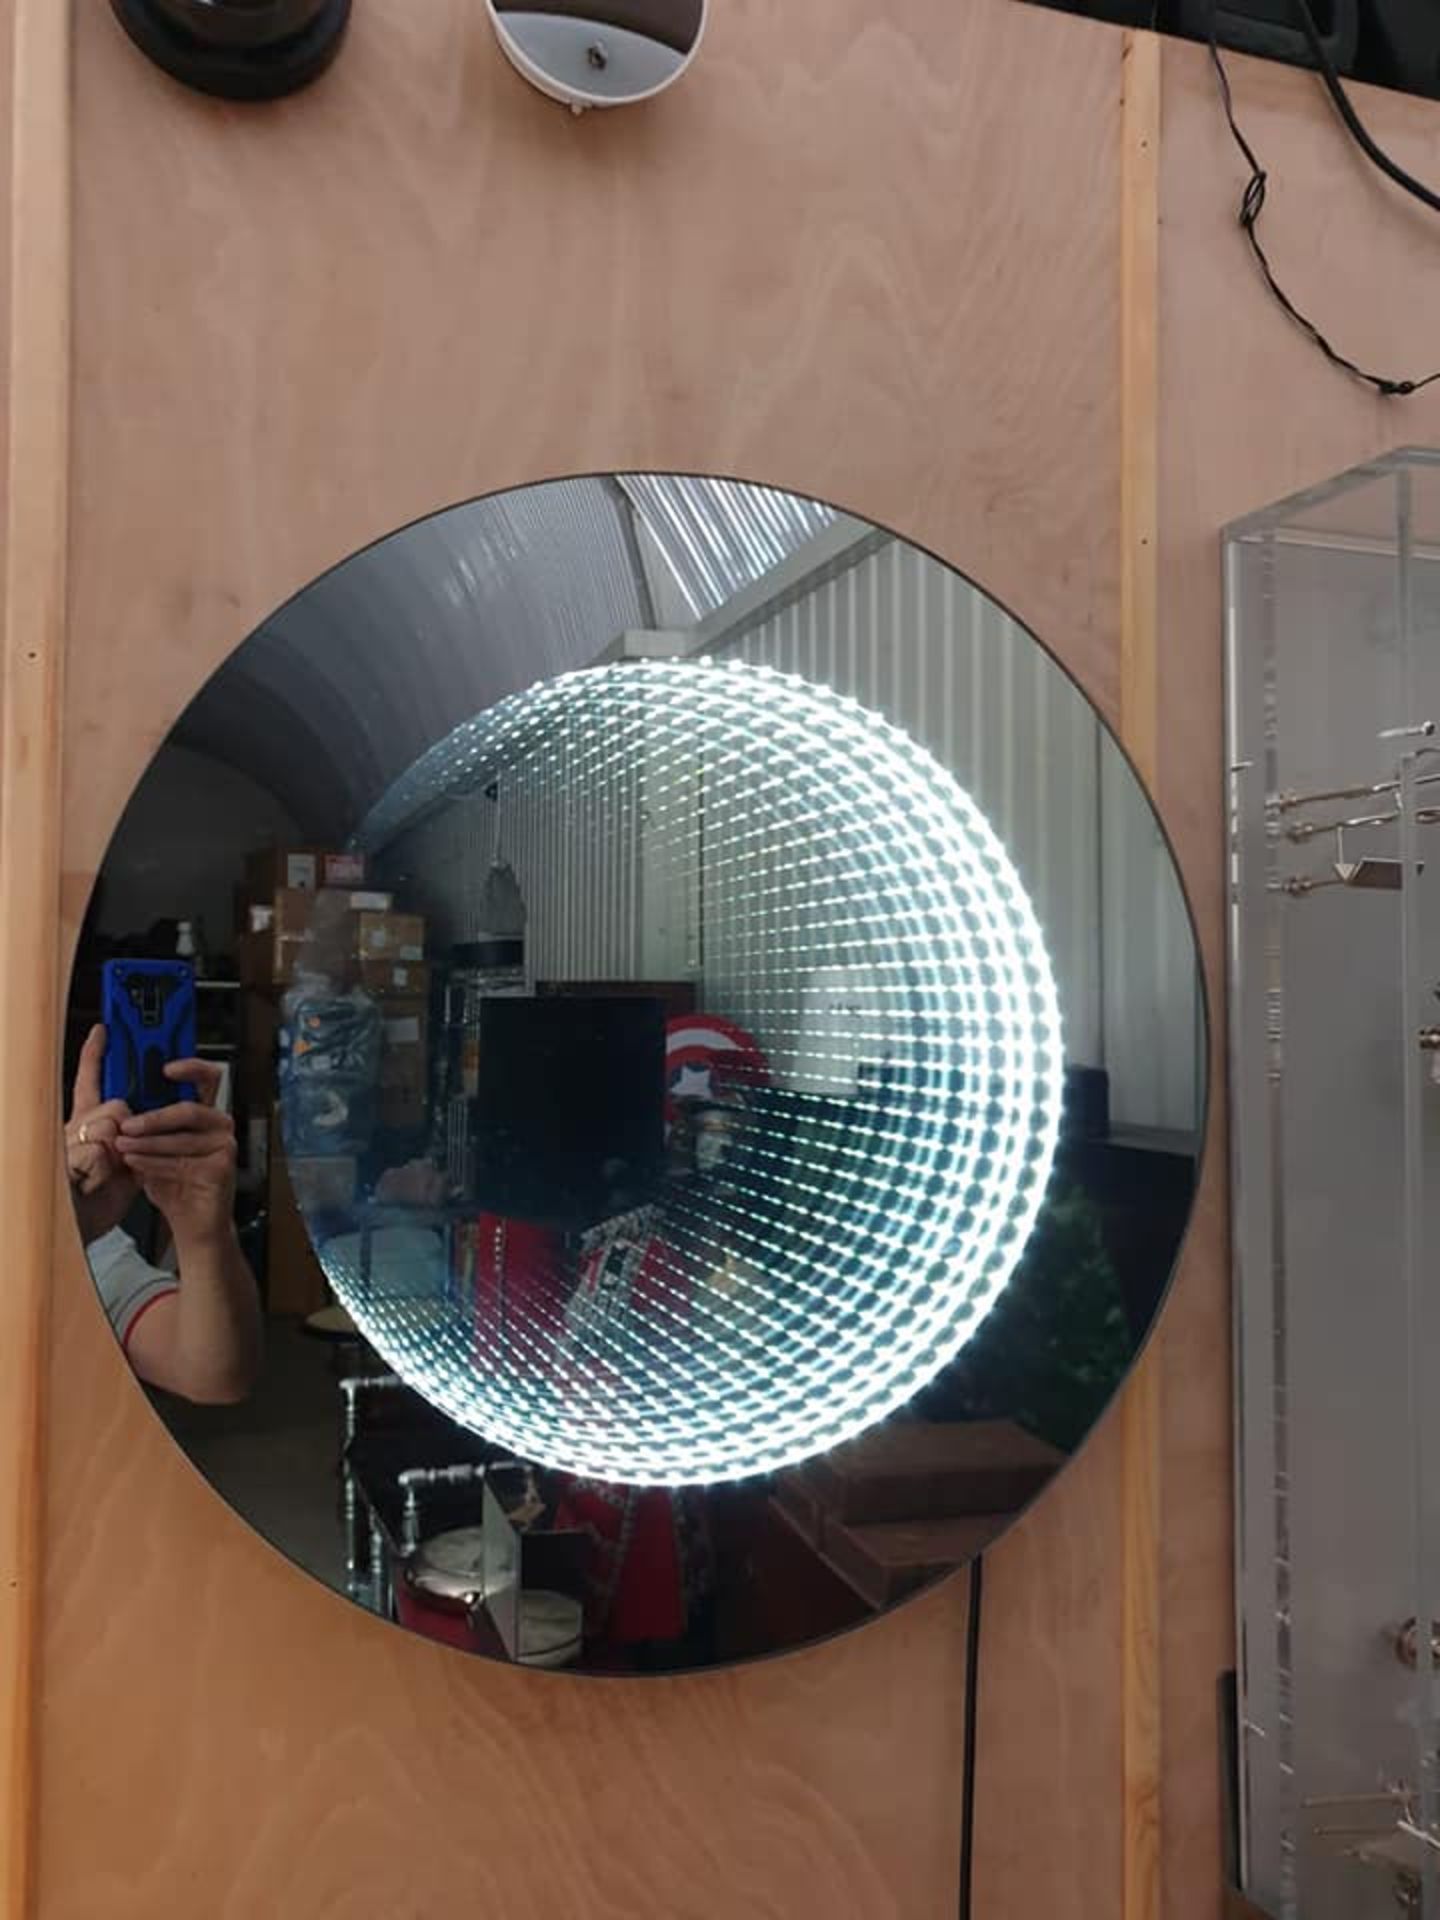 Infinity Mirror Lights Up To Reveal A Seemingly Endless Line Of Reflections Appearing Smaller And - Image 2 of 2